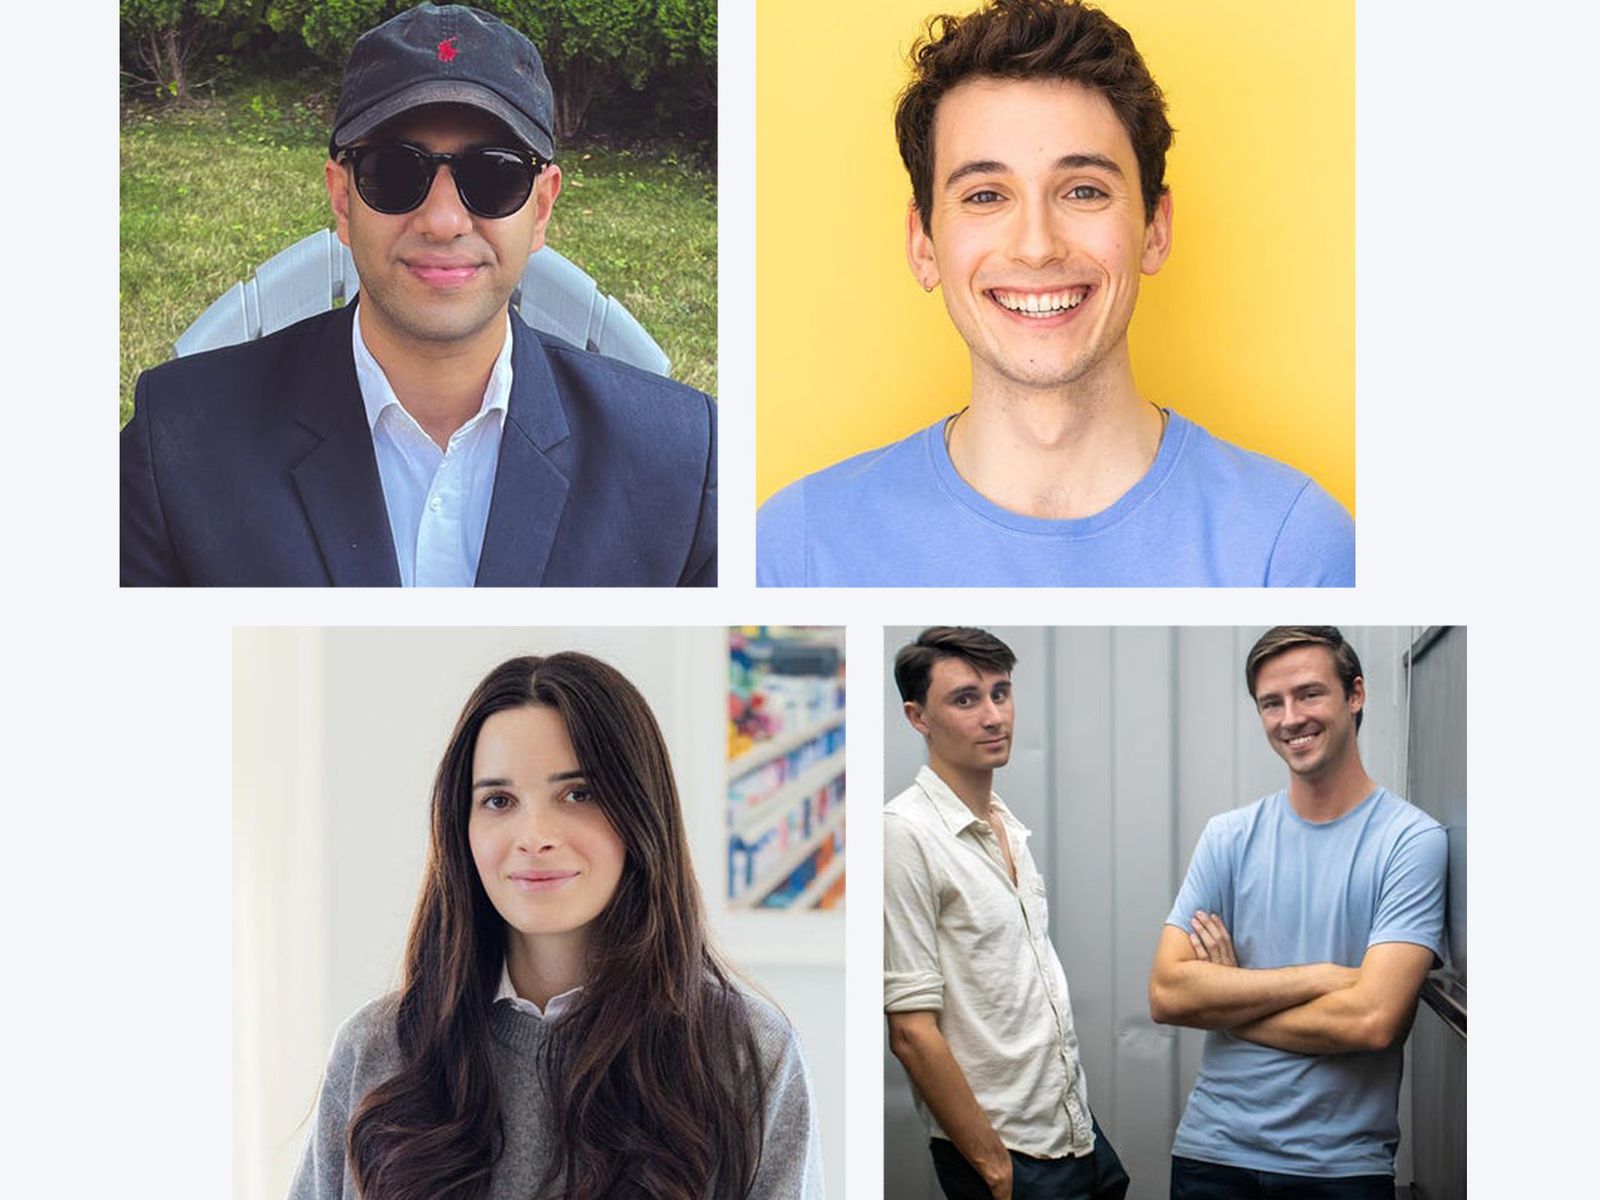 Meet the Trio of UVA Alumni on the 2022 Forbes '30 Under 30' Lists